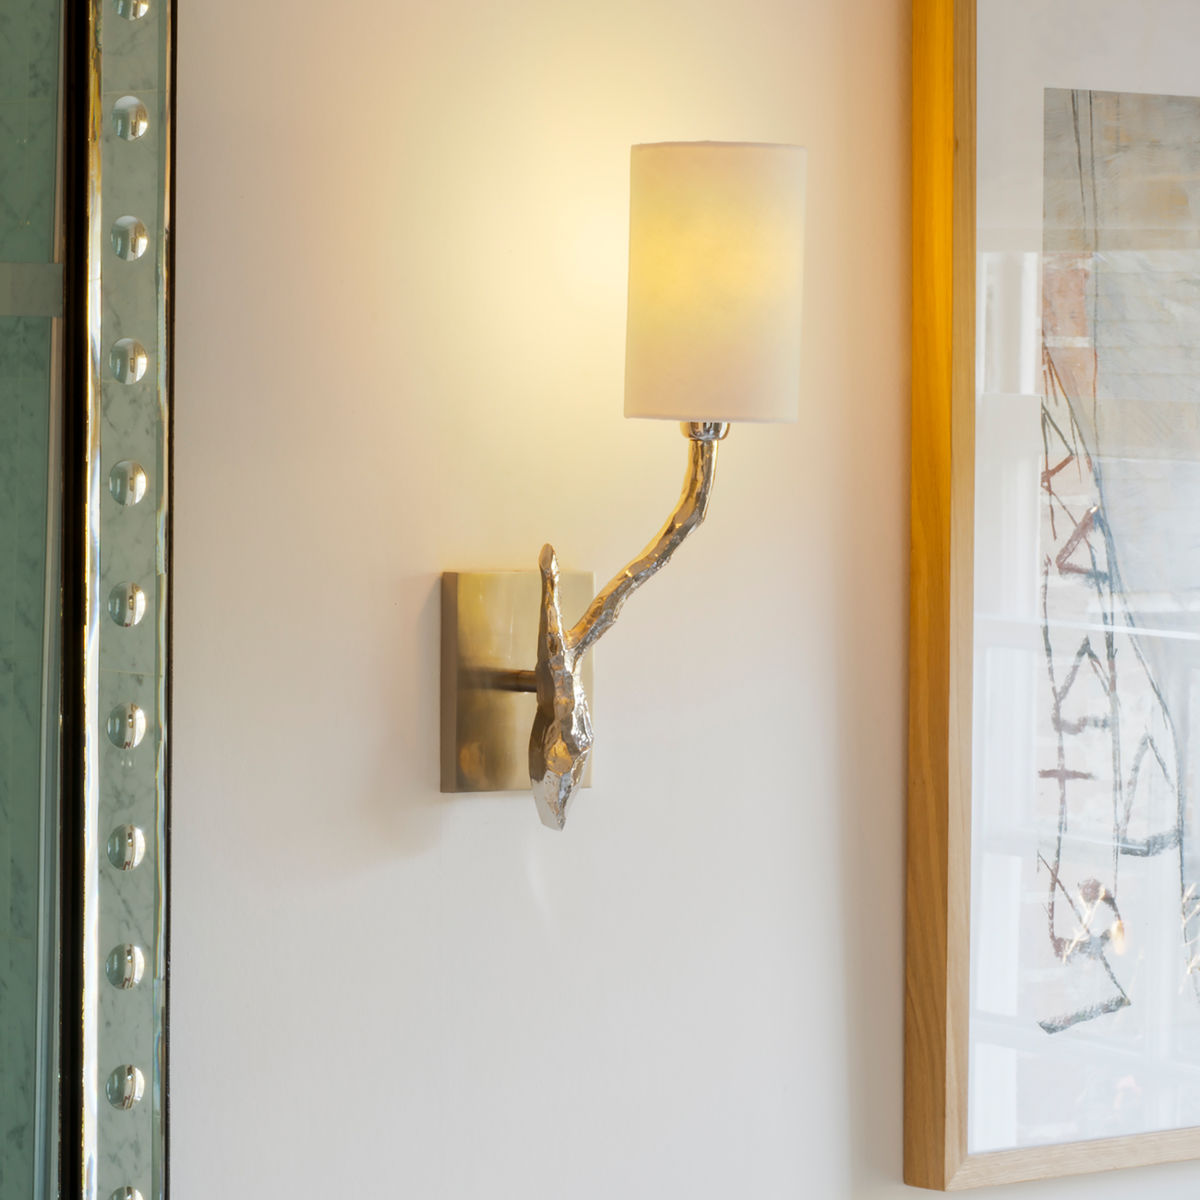 Plain cream cylindrical lampshade on brass wall light next to painting